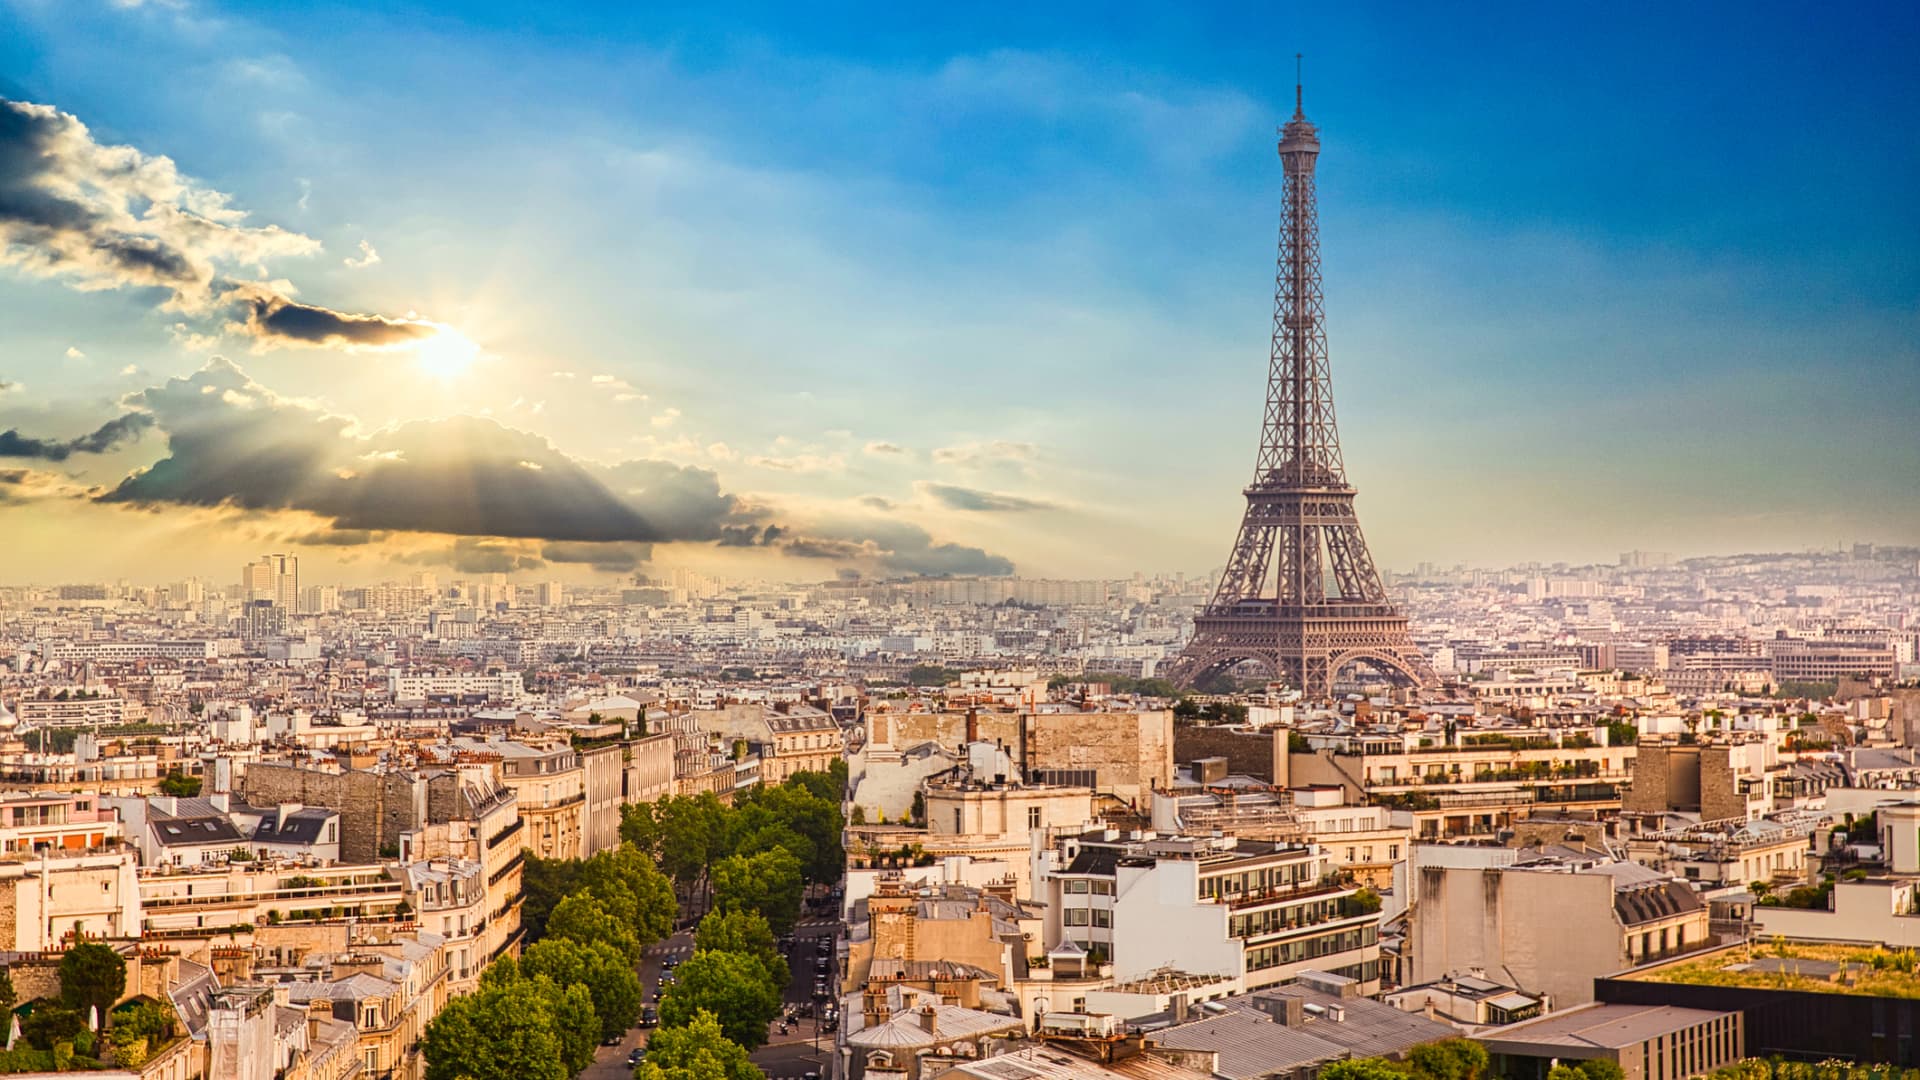 The Eiffel Tower isn't the only sight to see in Paris, although it is magnificent. Tourists can journey to the top and enjoy a glass of champagne for 45,80 euros.